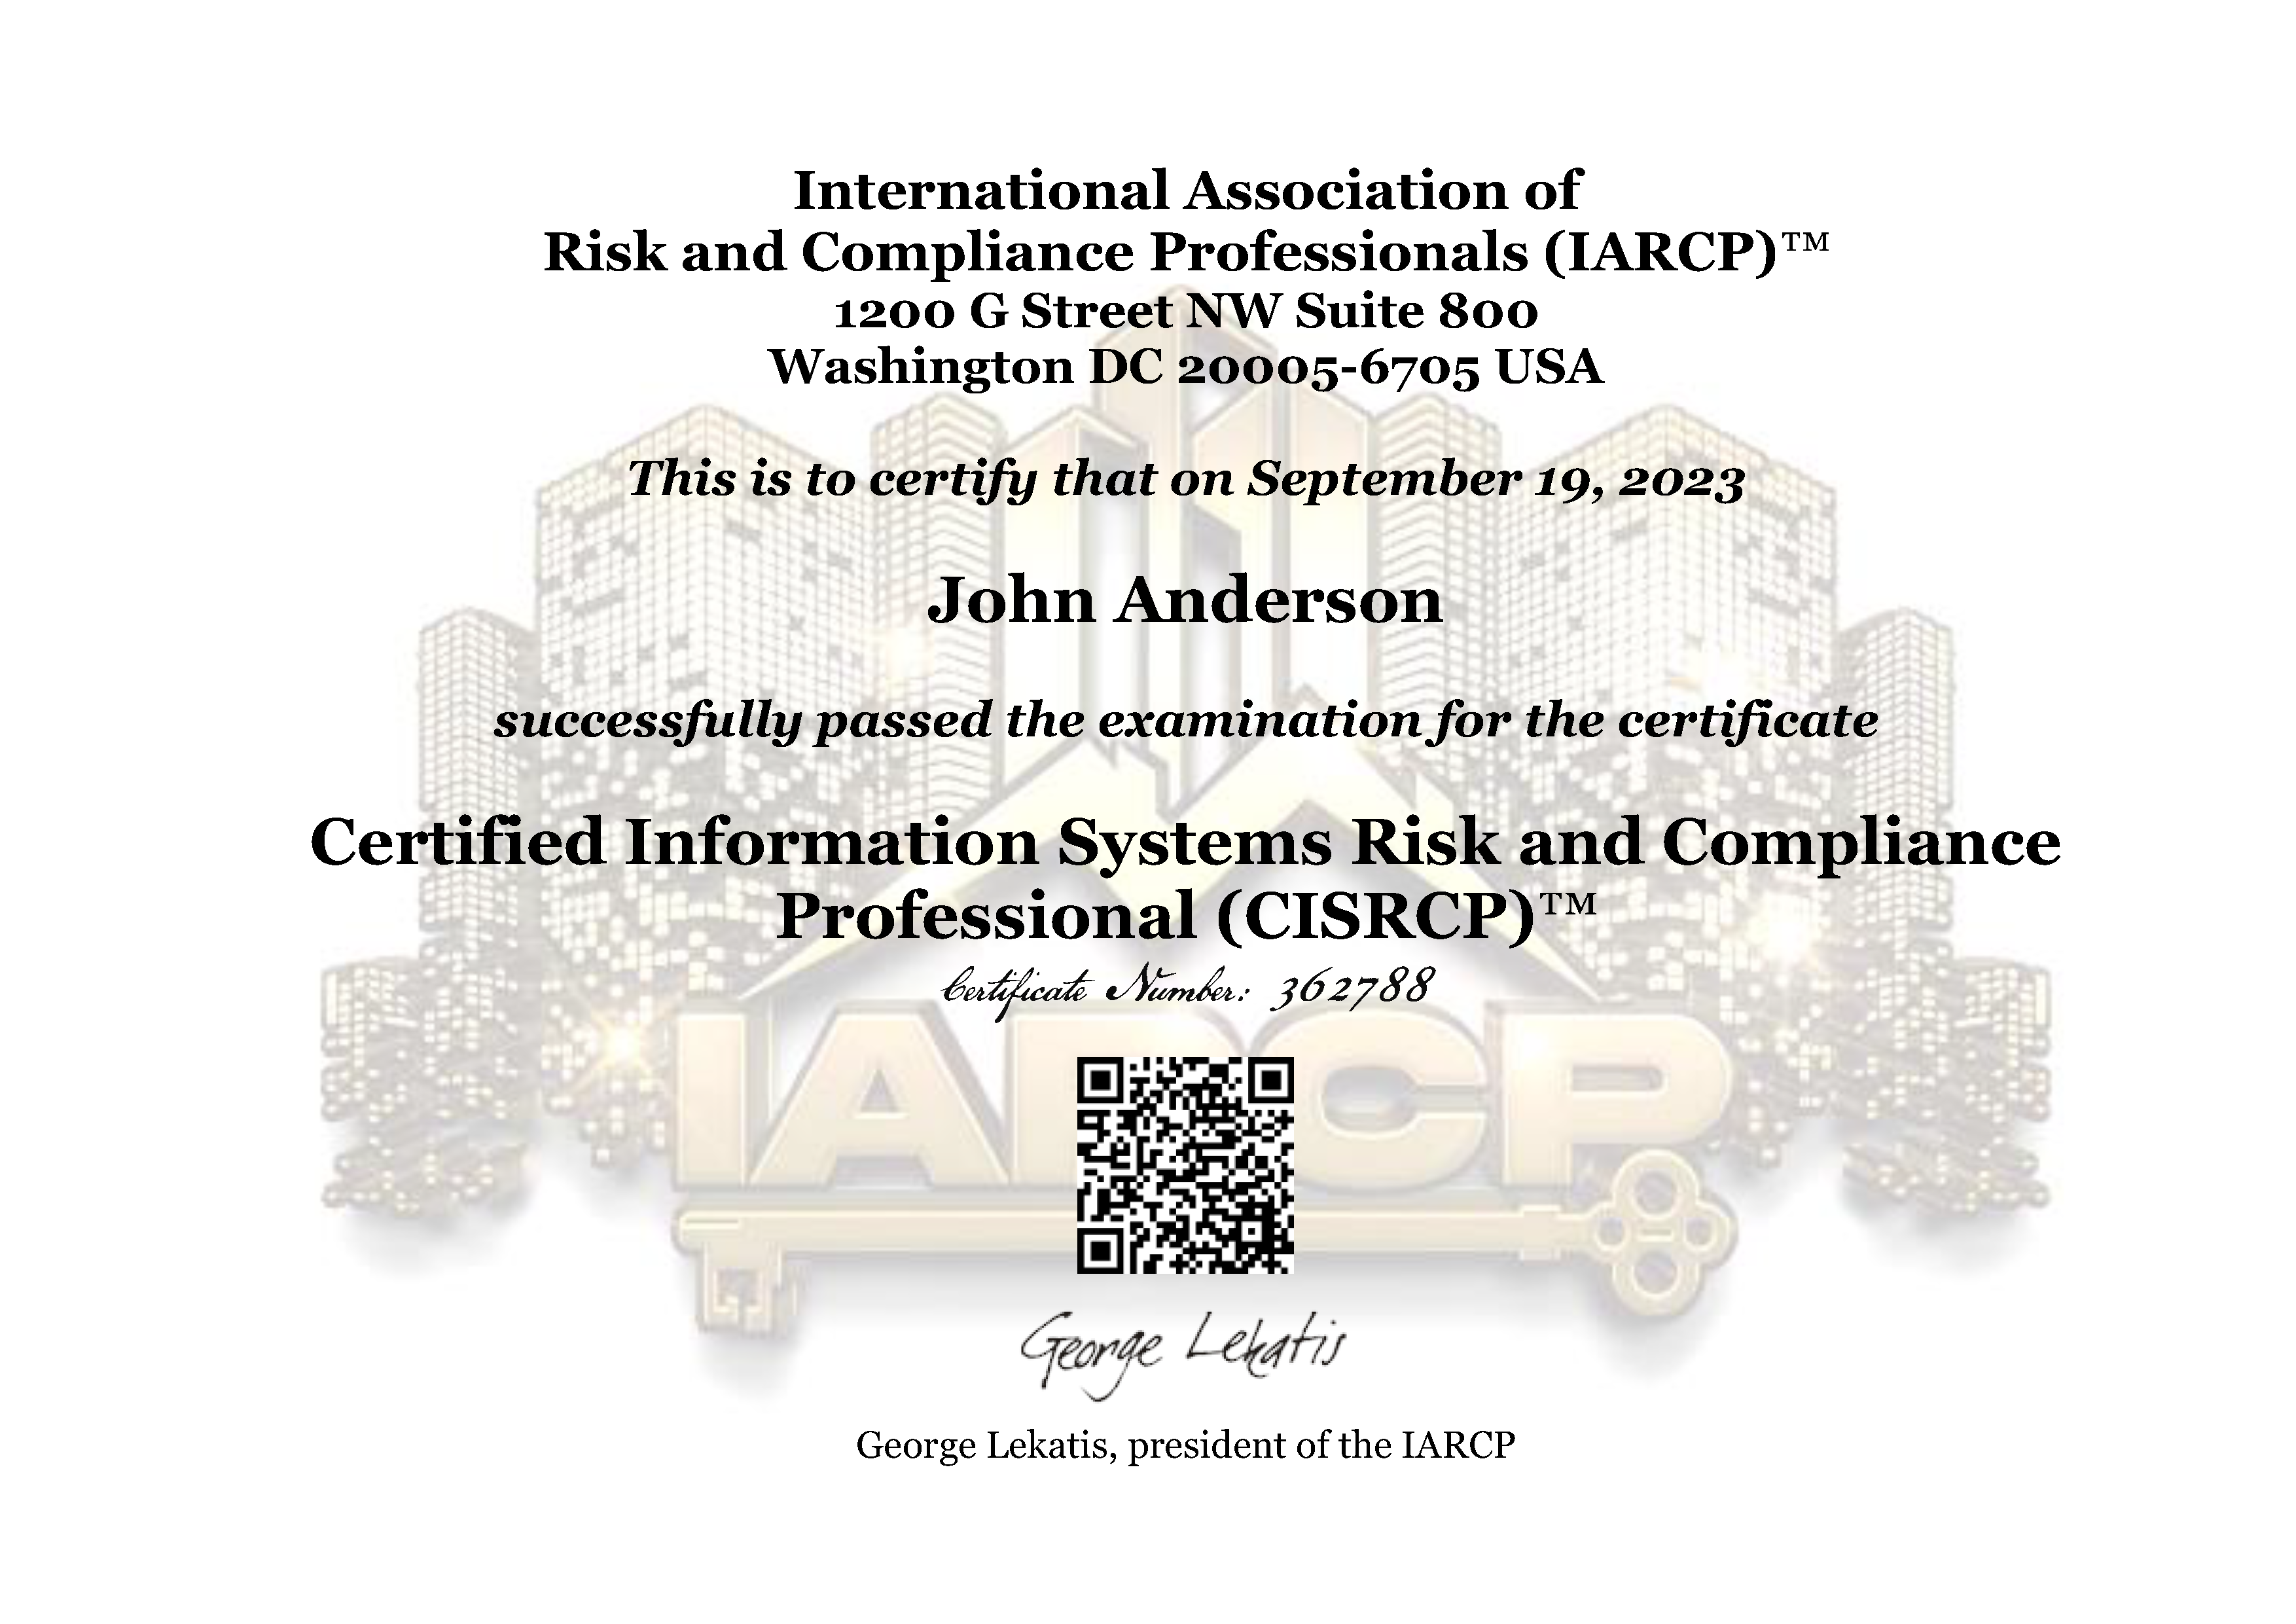 Certified Information Systems Risk and Compliance Professional (CISRCP)